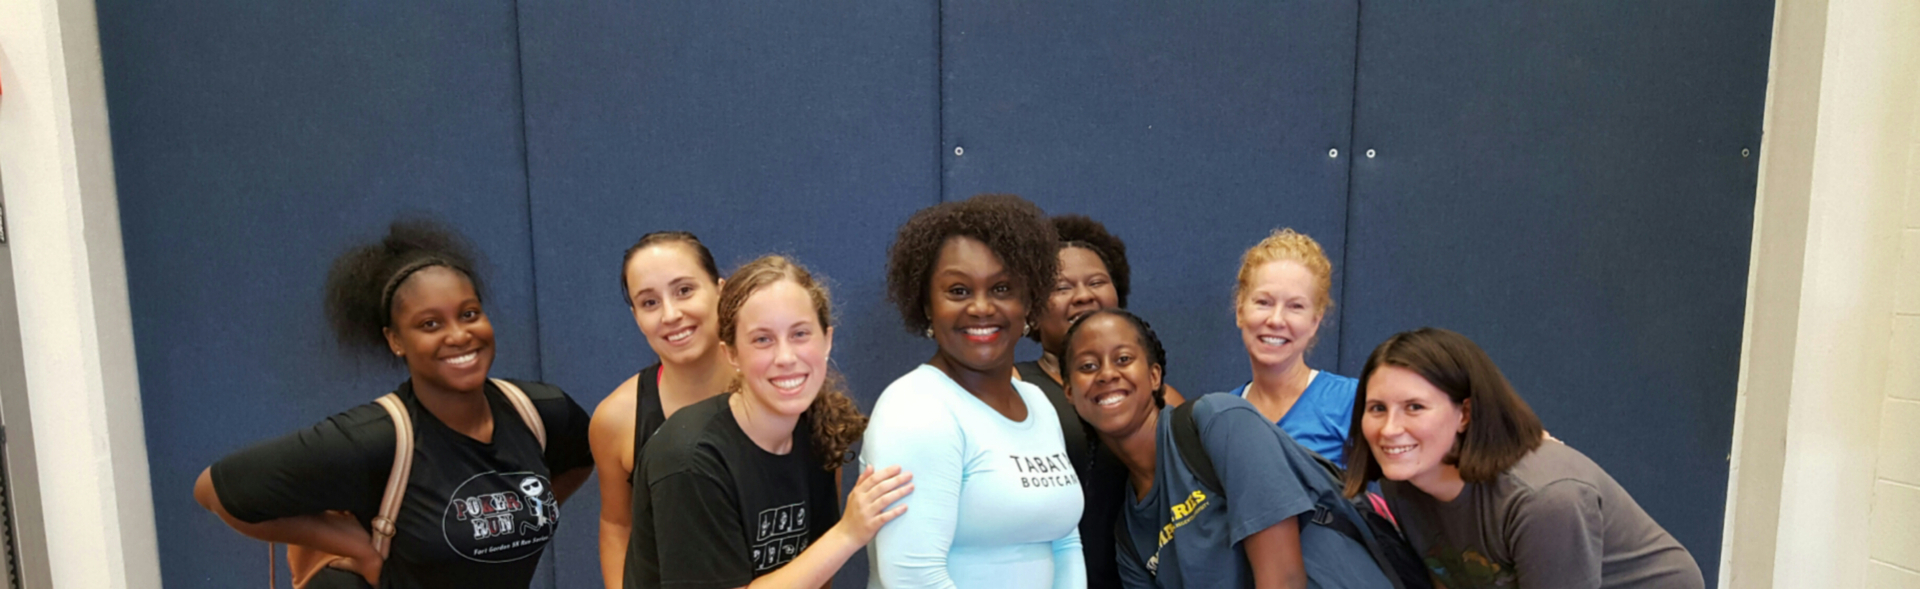 Jackie Dennis with a group of females after a wellness class smiling